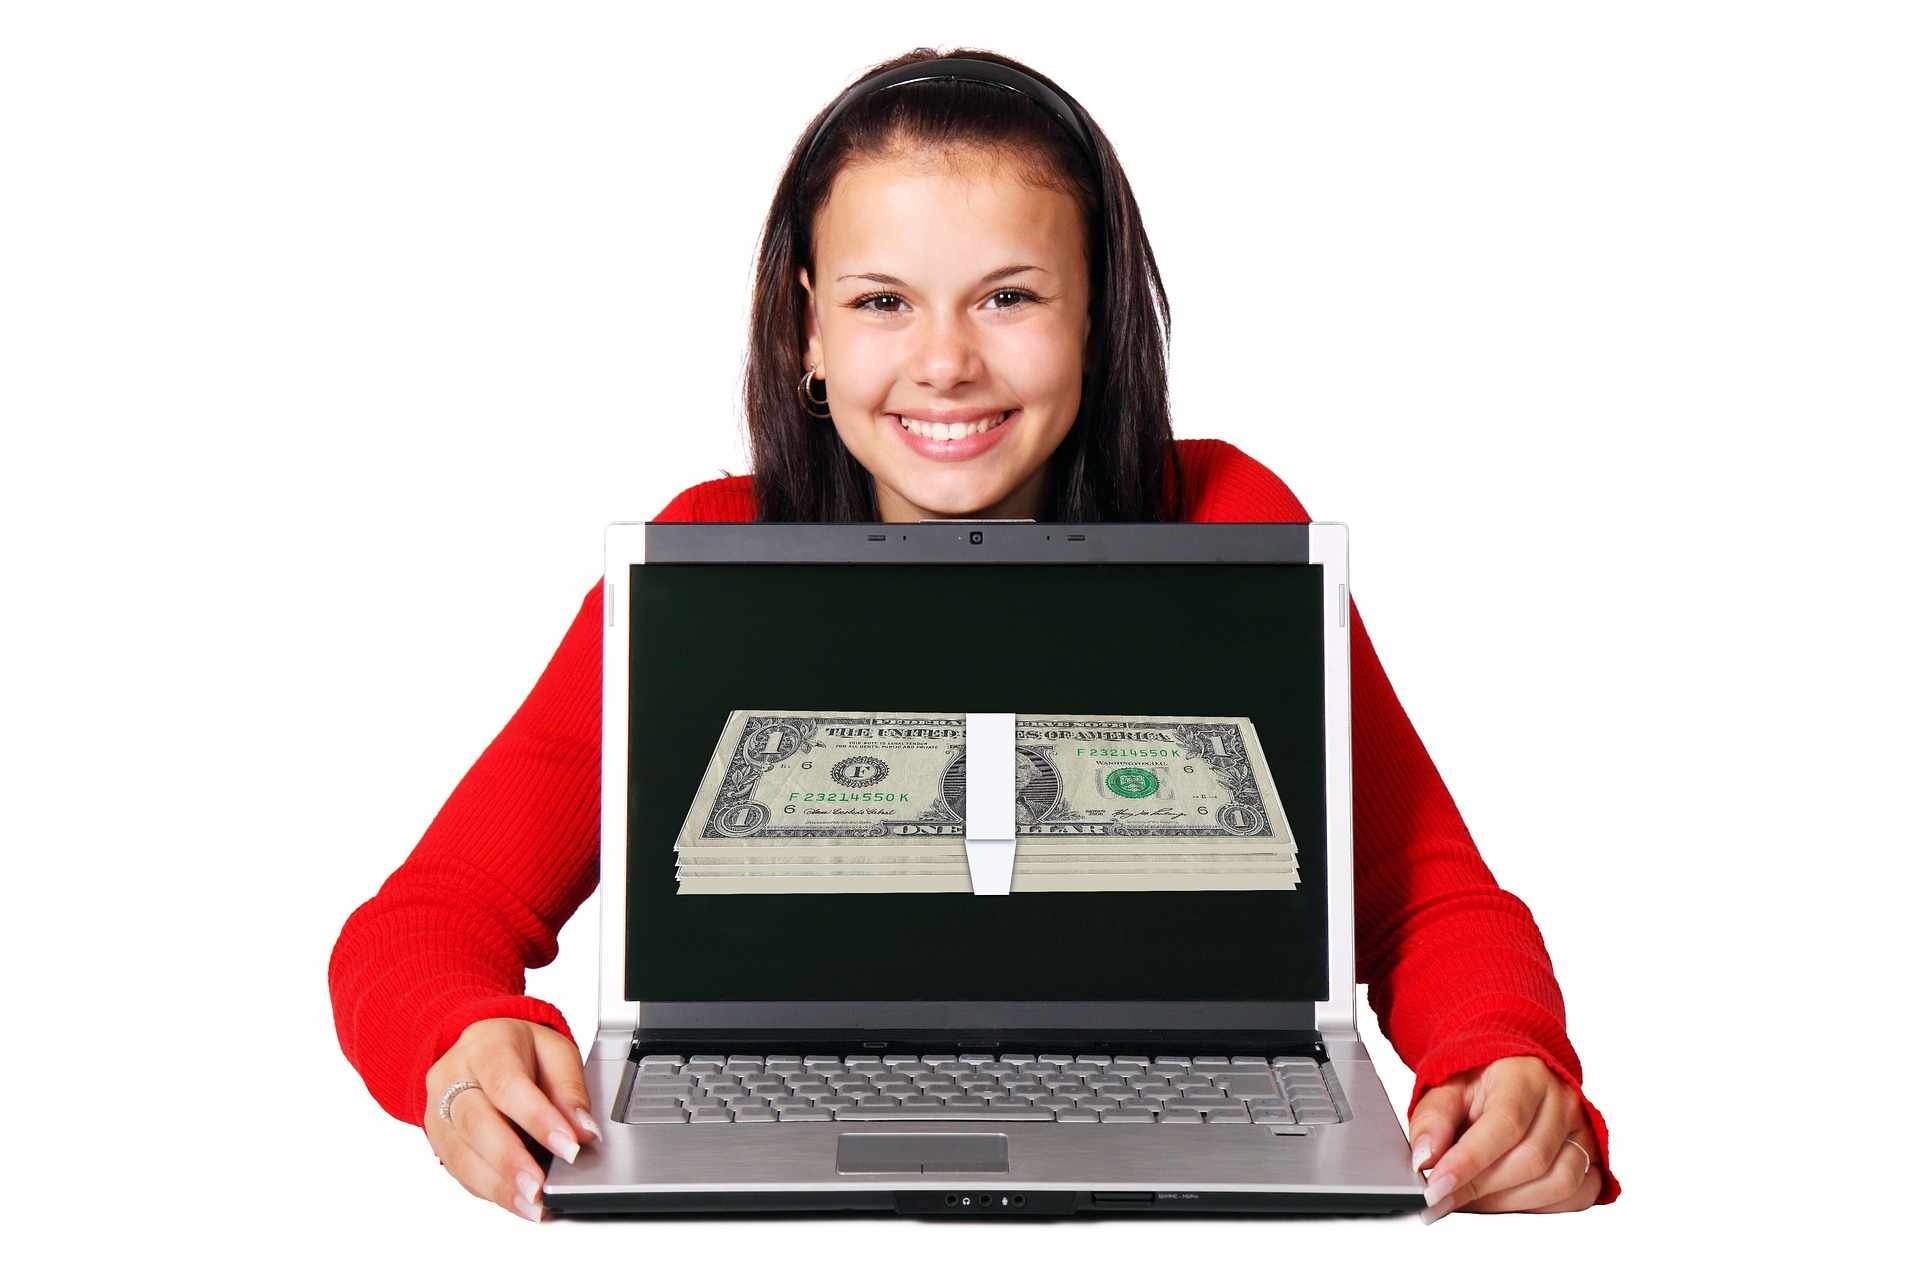 Do You Know Blogging Site Can Make Money?